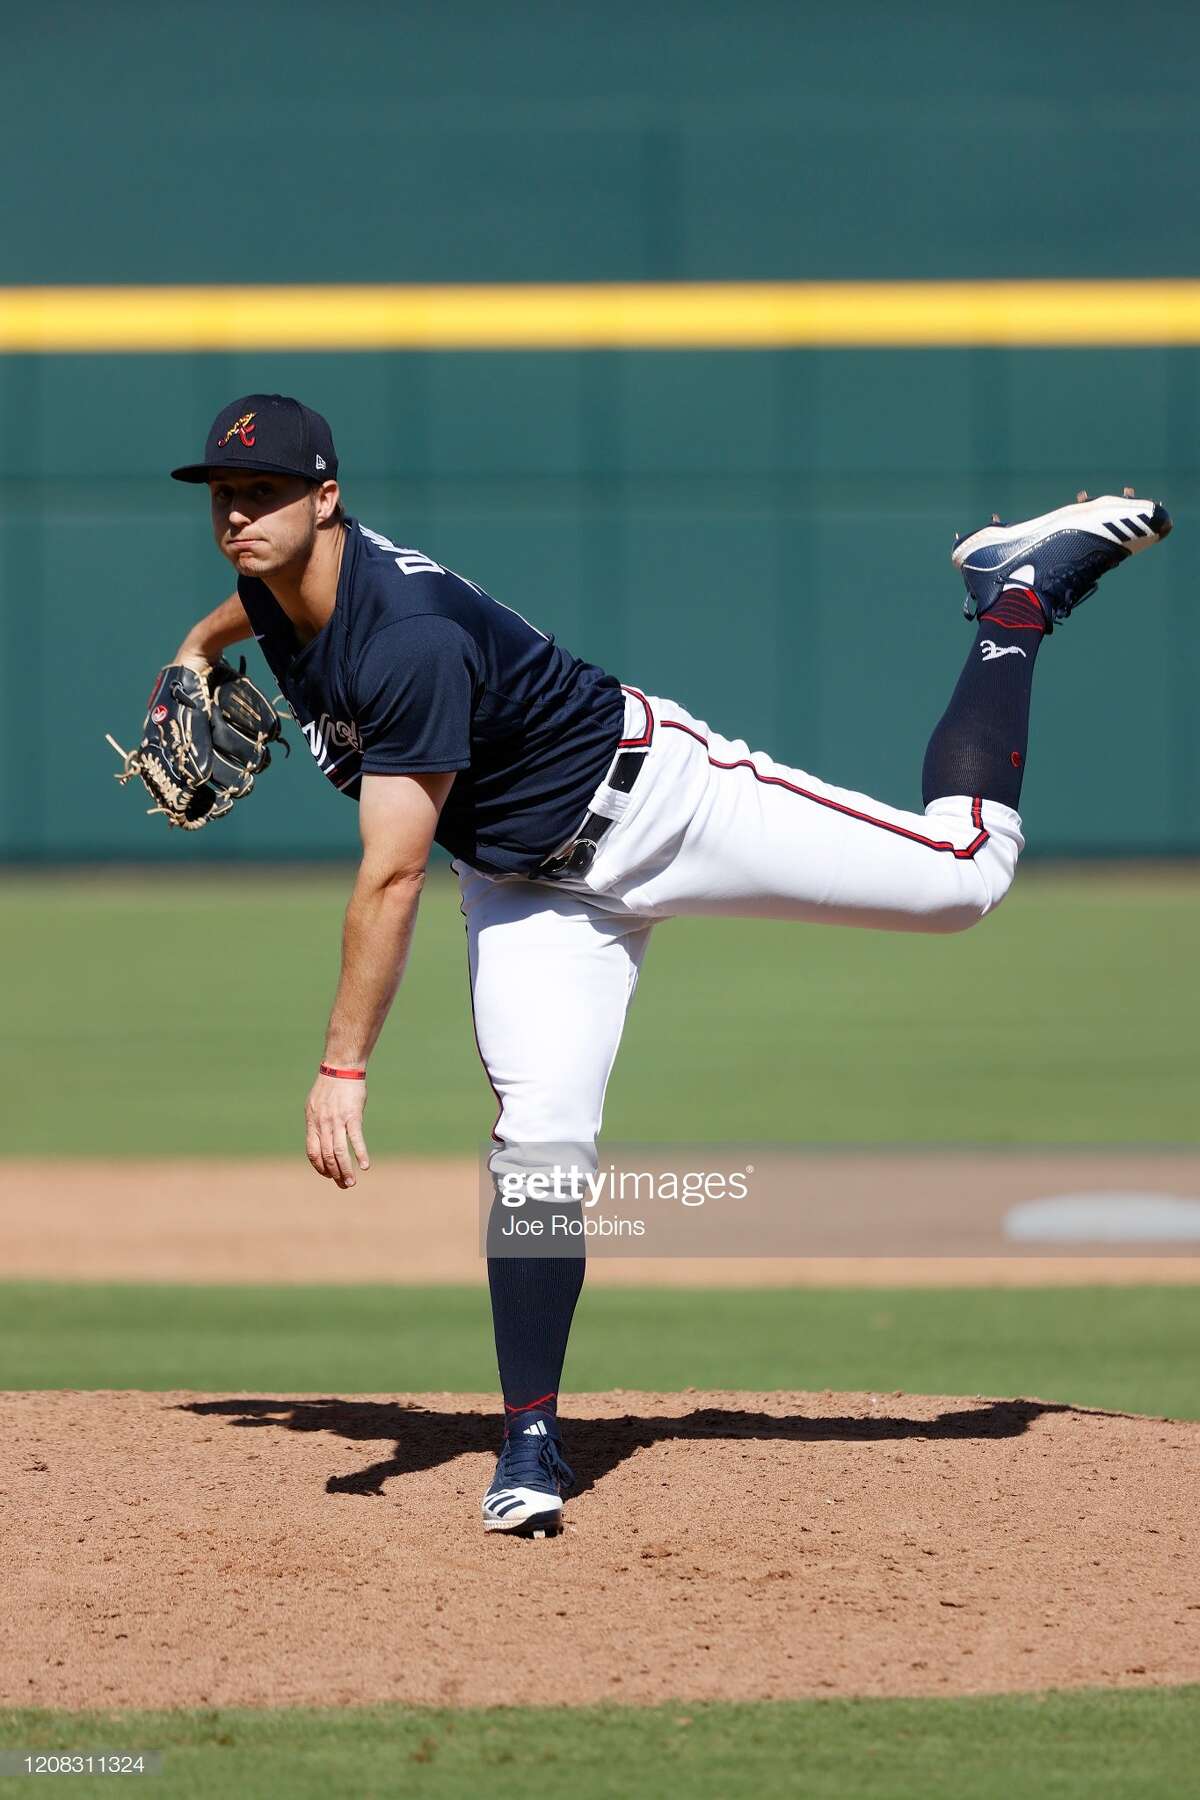 Former Midland College pitcher Tucker Davidson is shown in action pitching in the Atlanta Braves farm system in this undated photo.